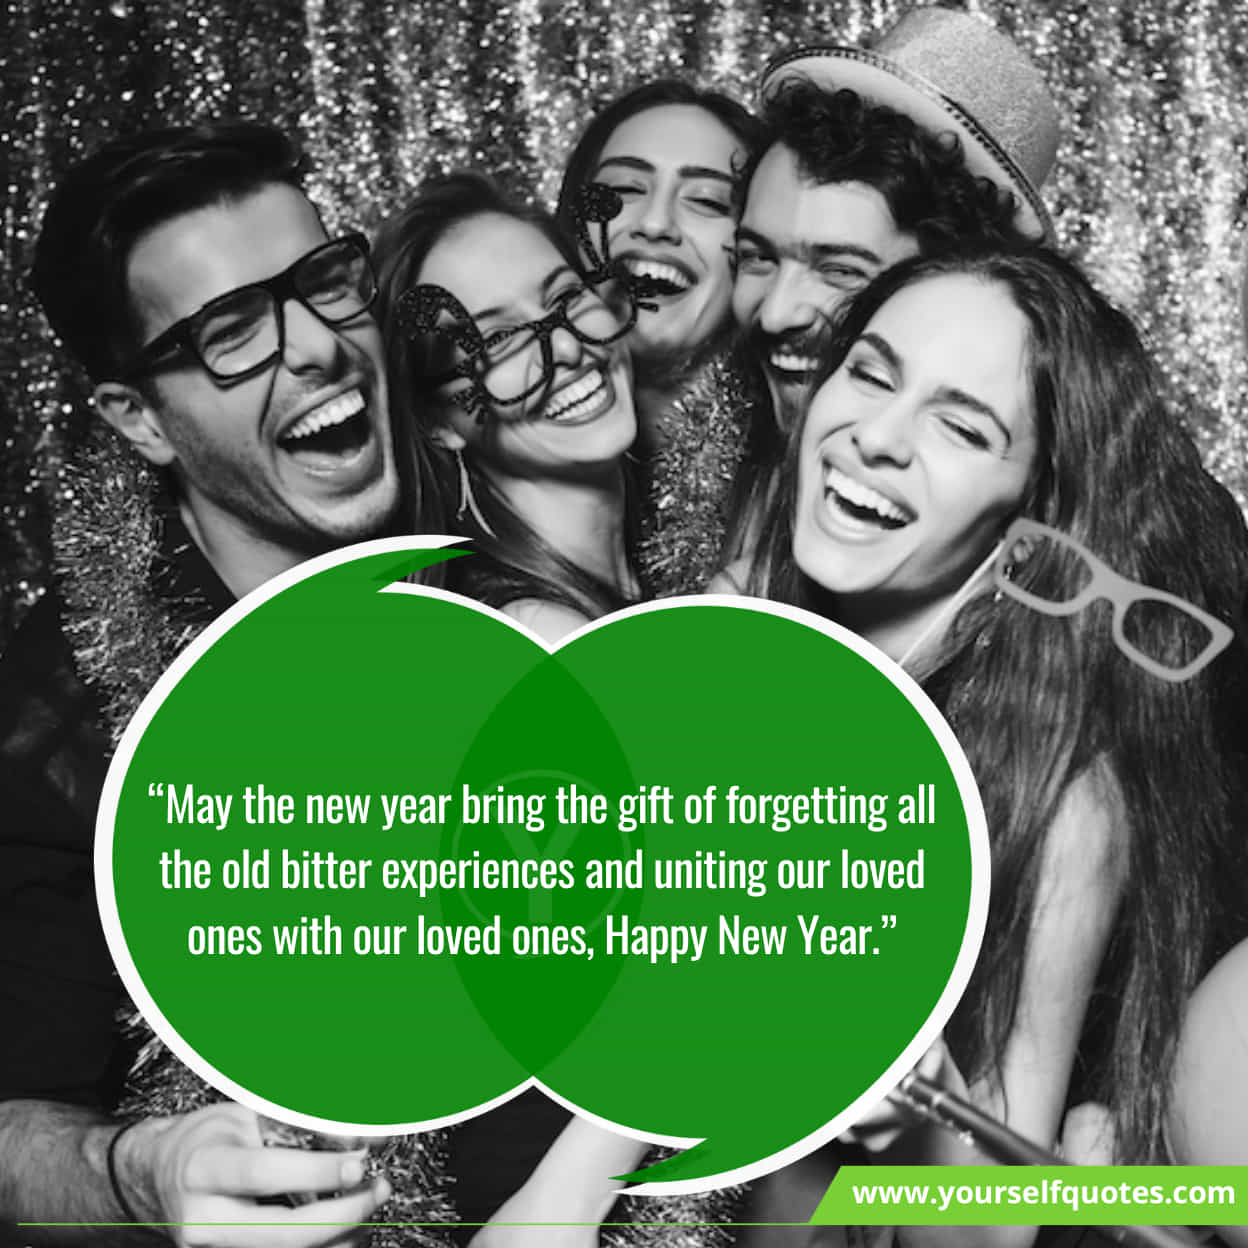 New Year WhatsApp Status For Loved Ones